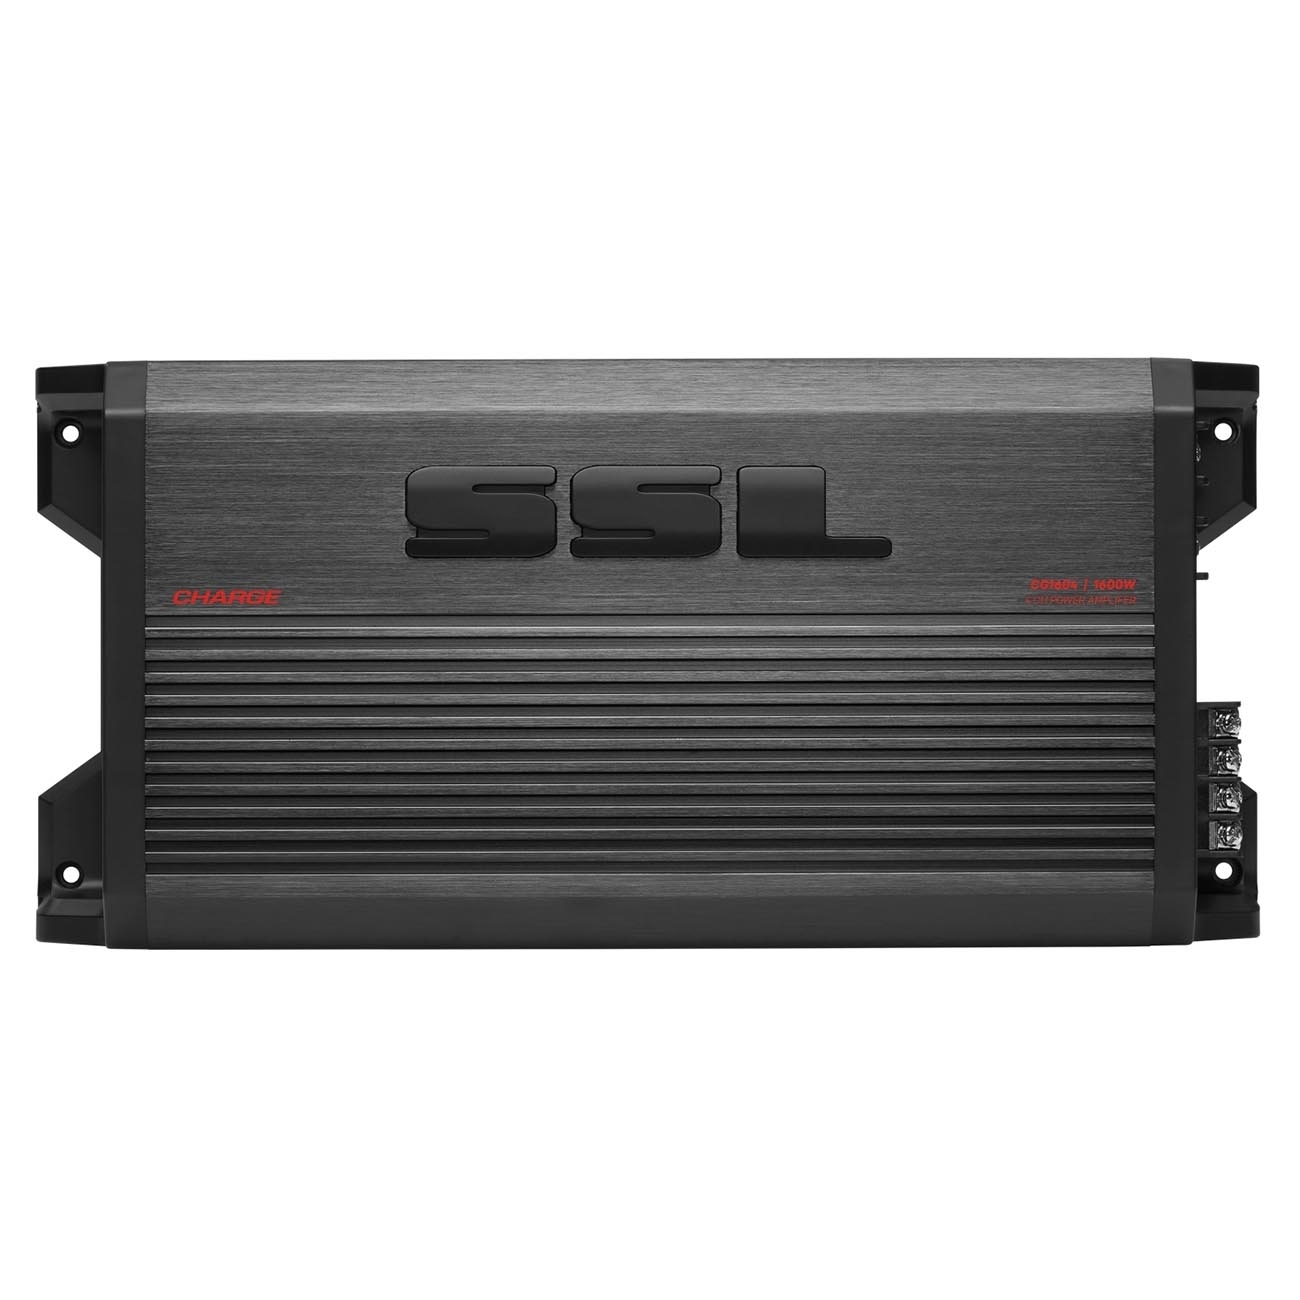 Sound Storm Laboratories CG1604 4 Channel Car Amplifier - 1600 Watts, Full Range, Class A/B, 2/4 Ohm Stable, Mosfet Power Supply, Bridgeable